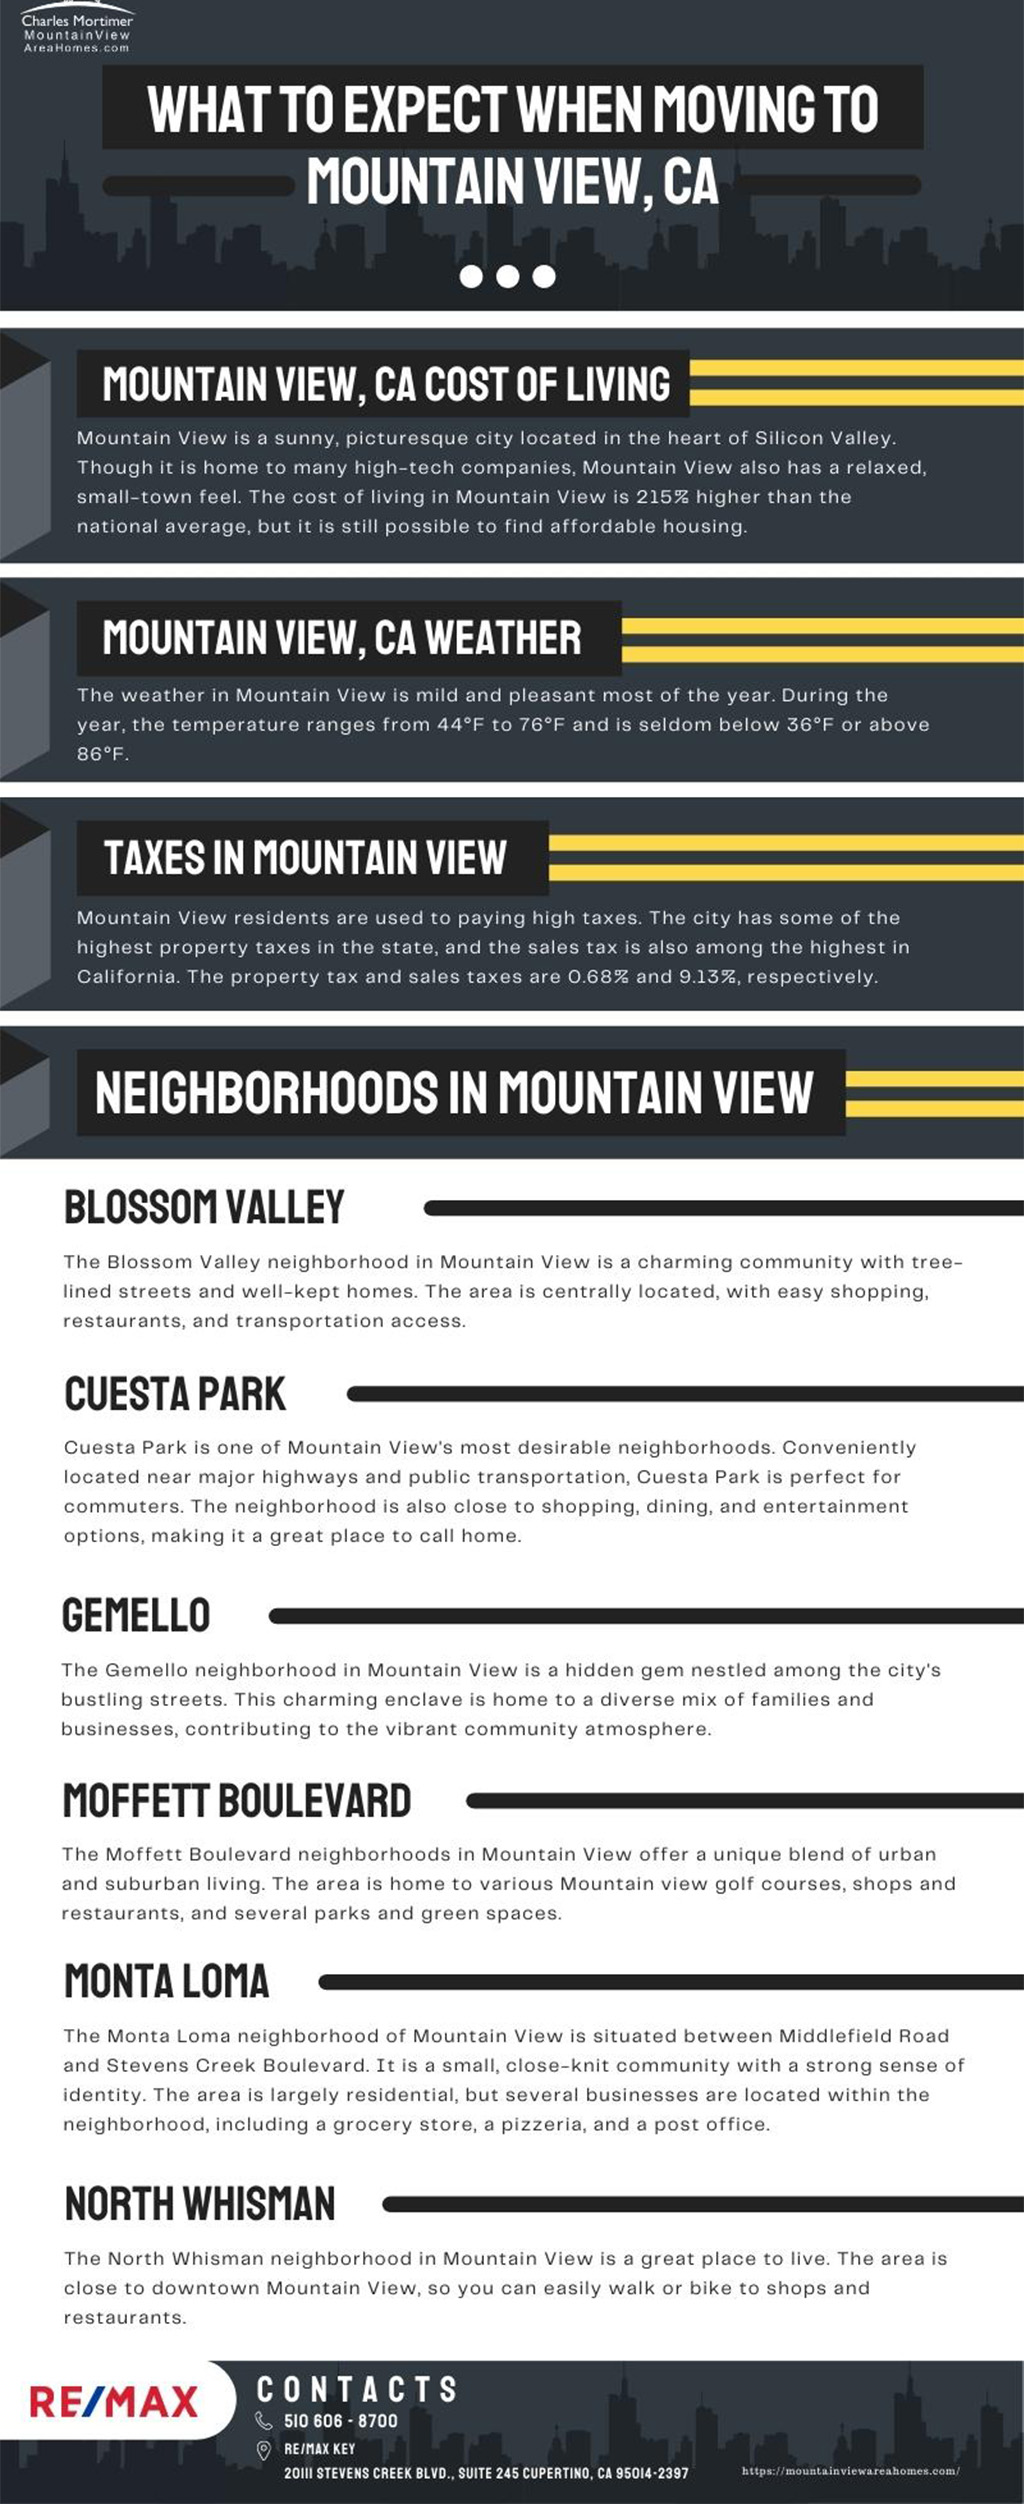 Moving to Mountain View CA infographic